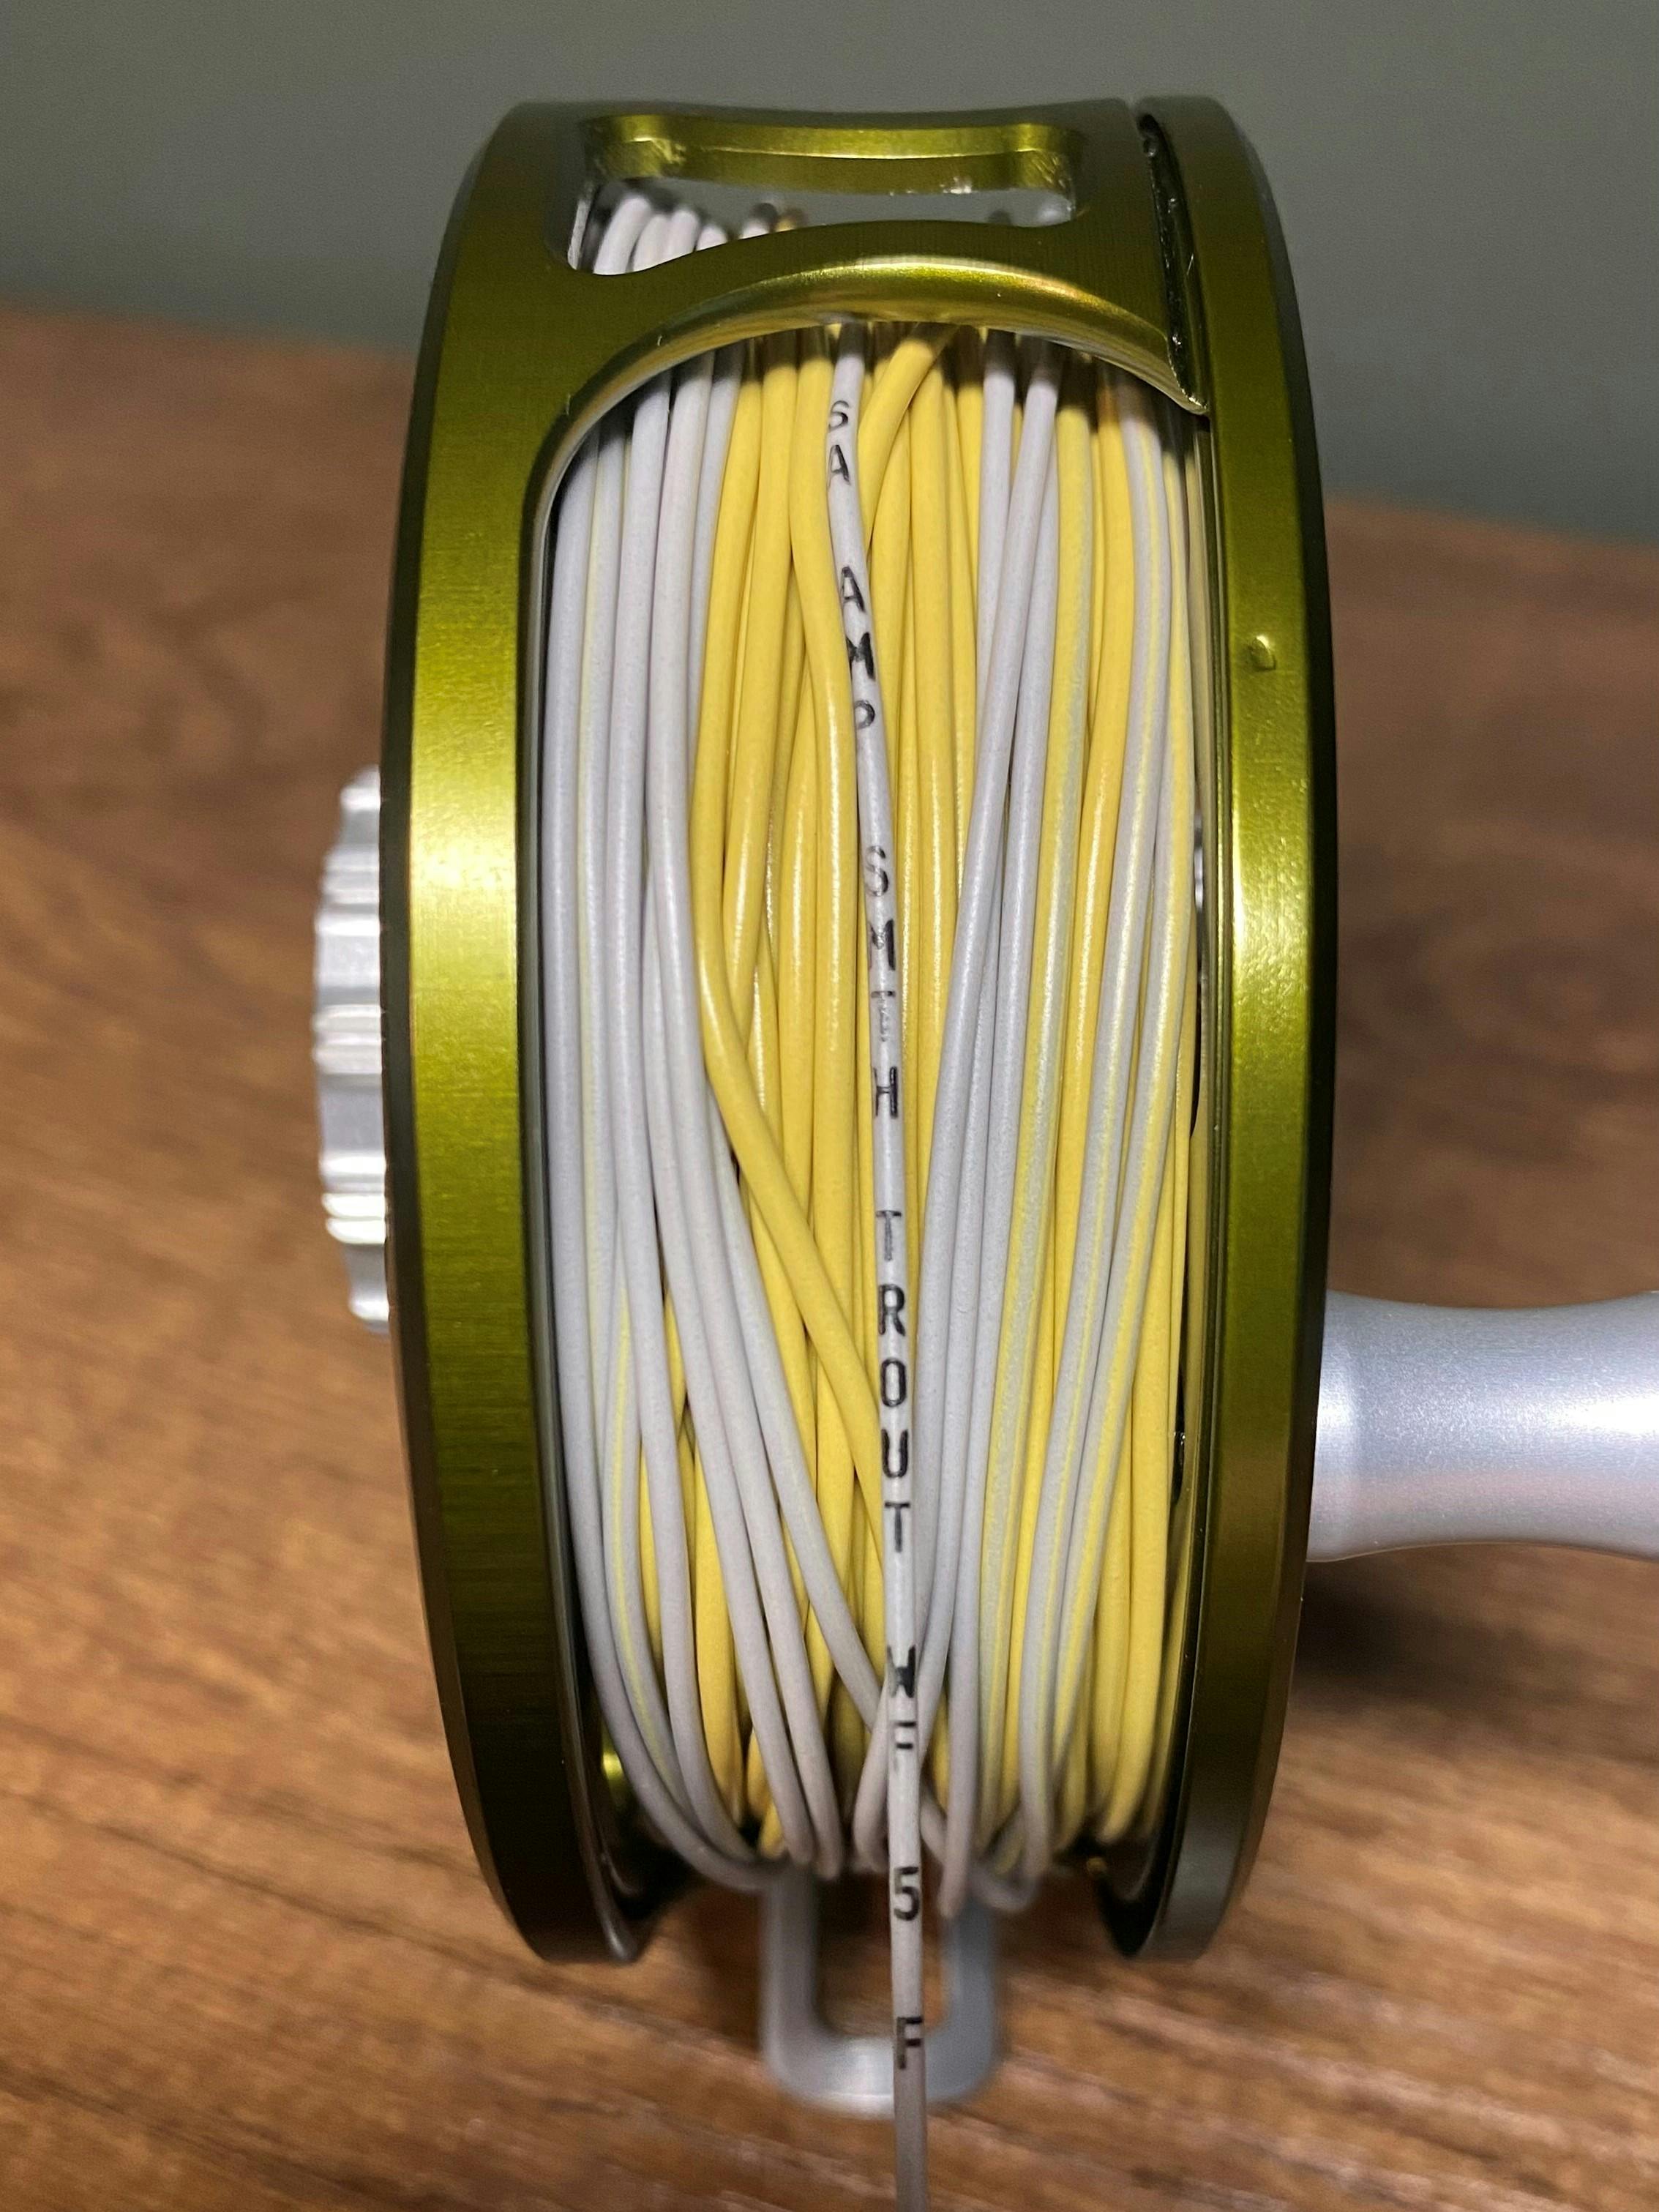  Rio Gold Fly Line 5wt